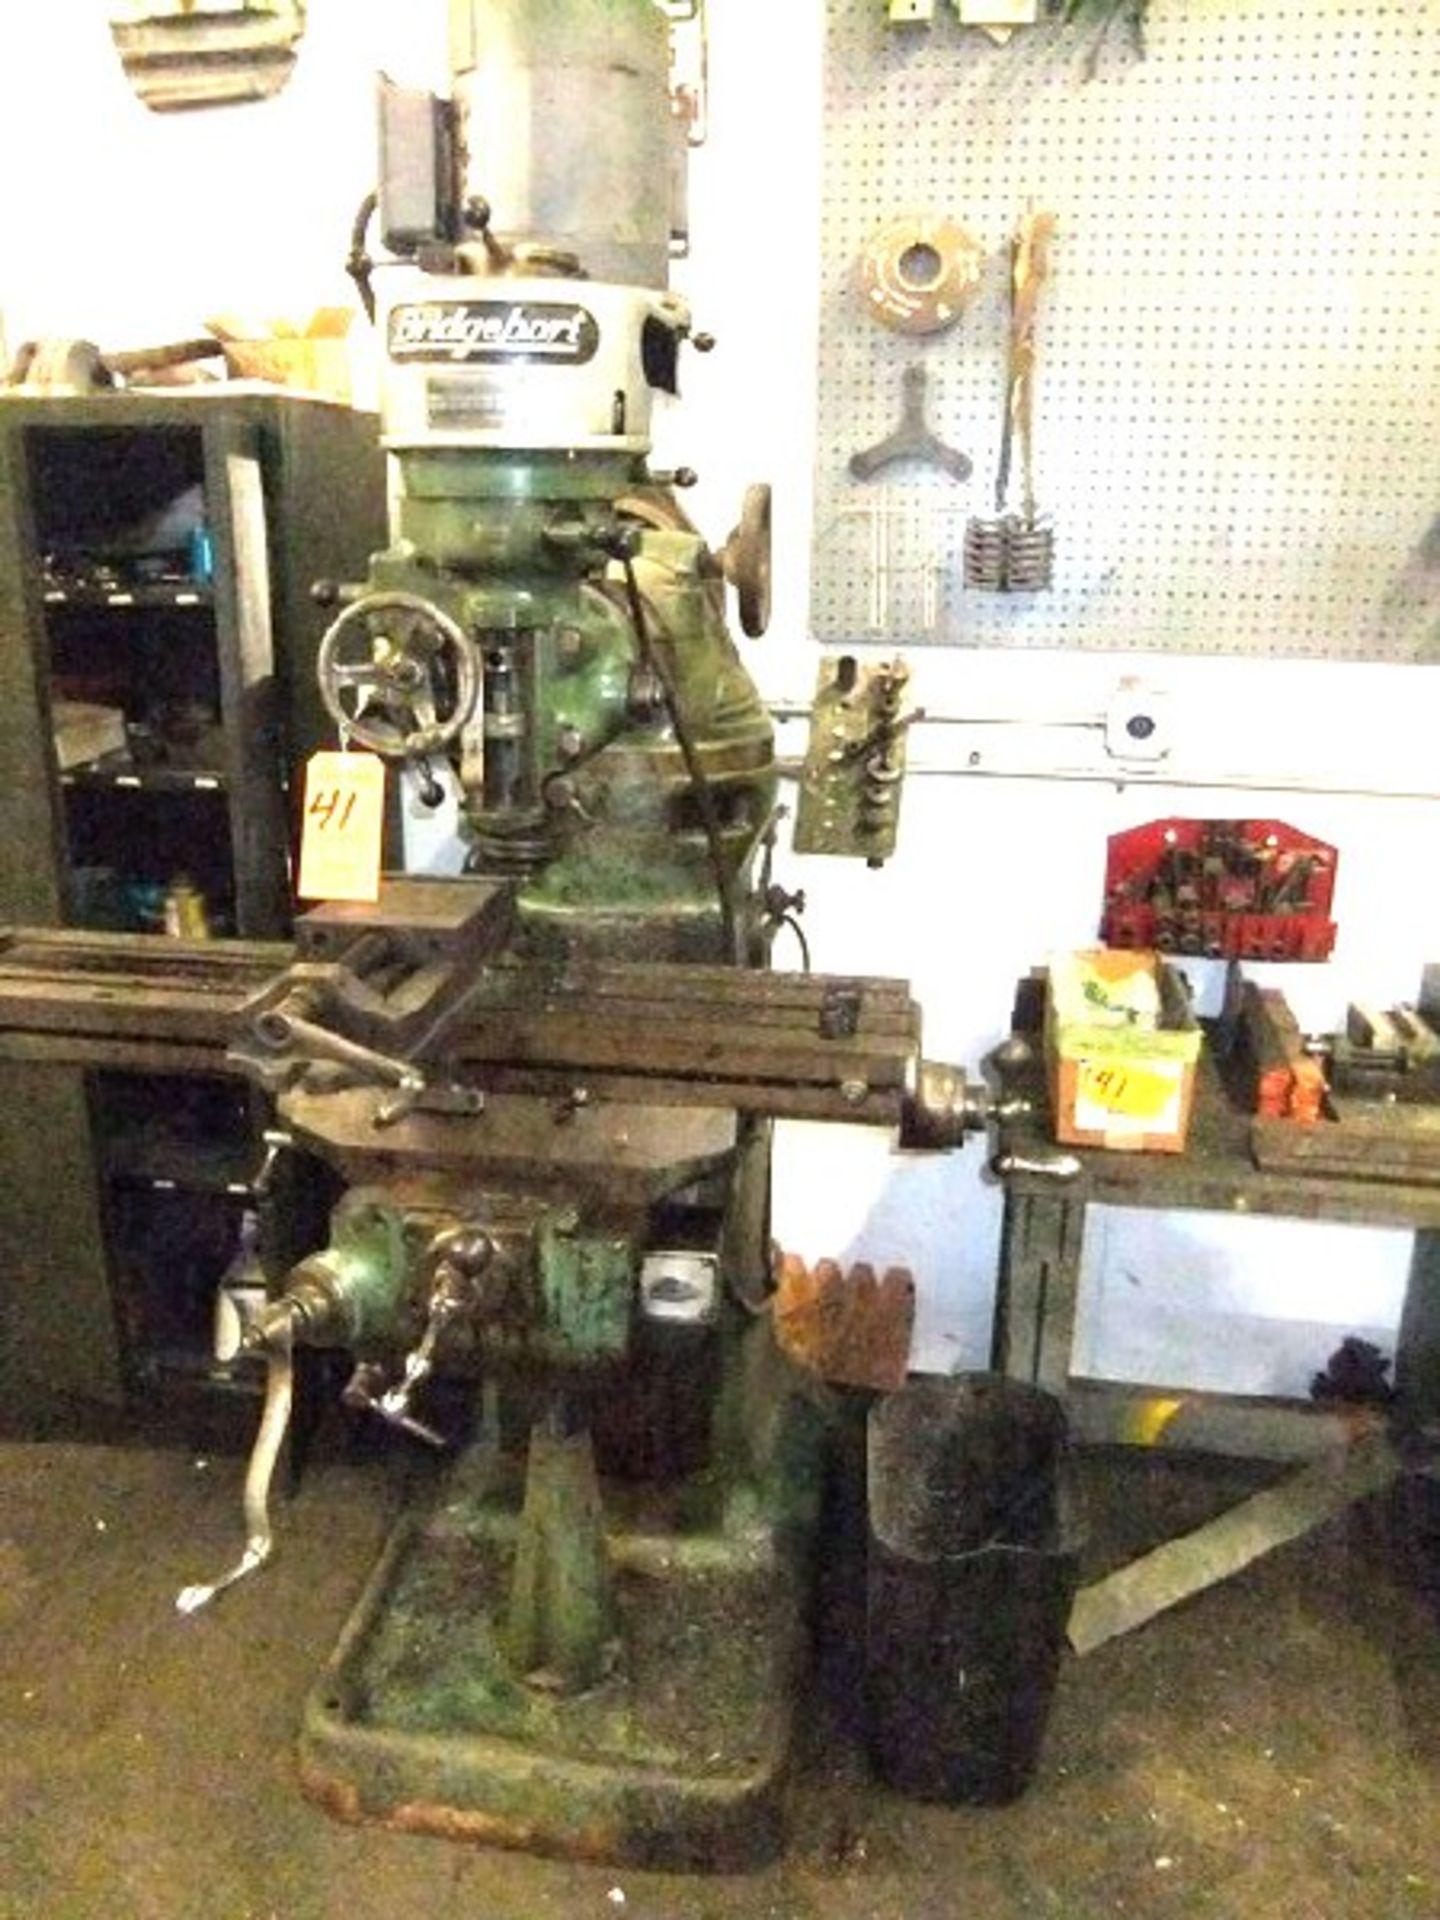 LOT: BRIDGEPORT ROUND OVERARM MILL MDL J, 1 HP HEAD W/ TABLE & CABINET W/ CONTENTS